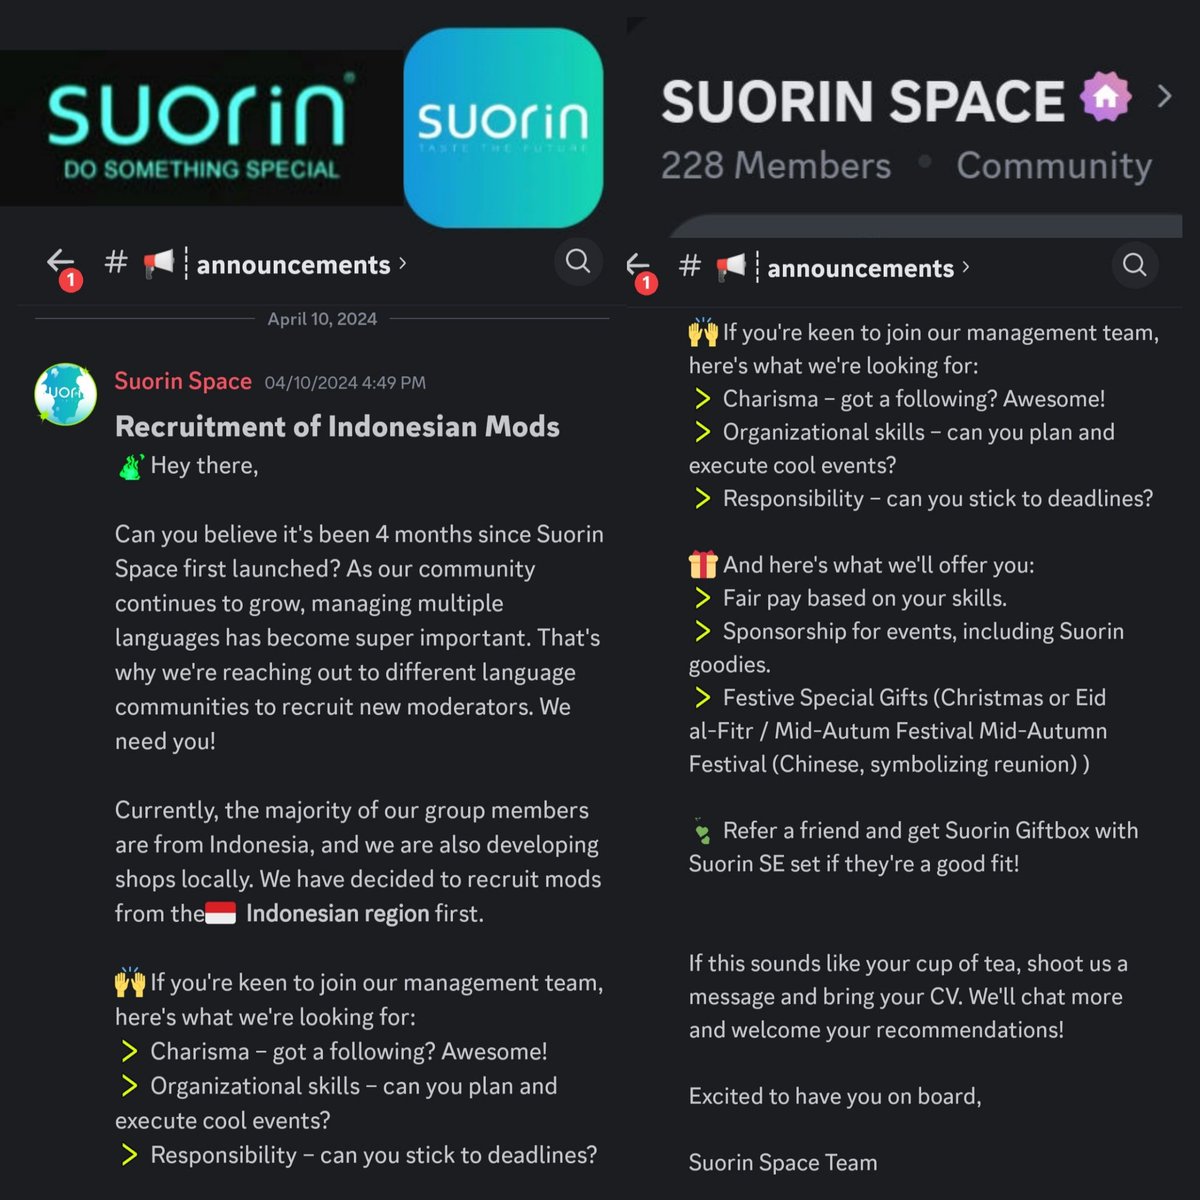 Calling all Indonesian vapers to join Suorin team. Contact @Suorinofficial1 for more details.

#suorin #discord